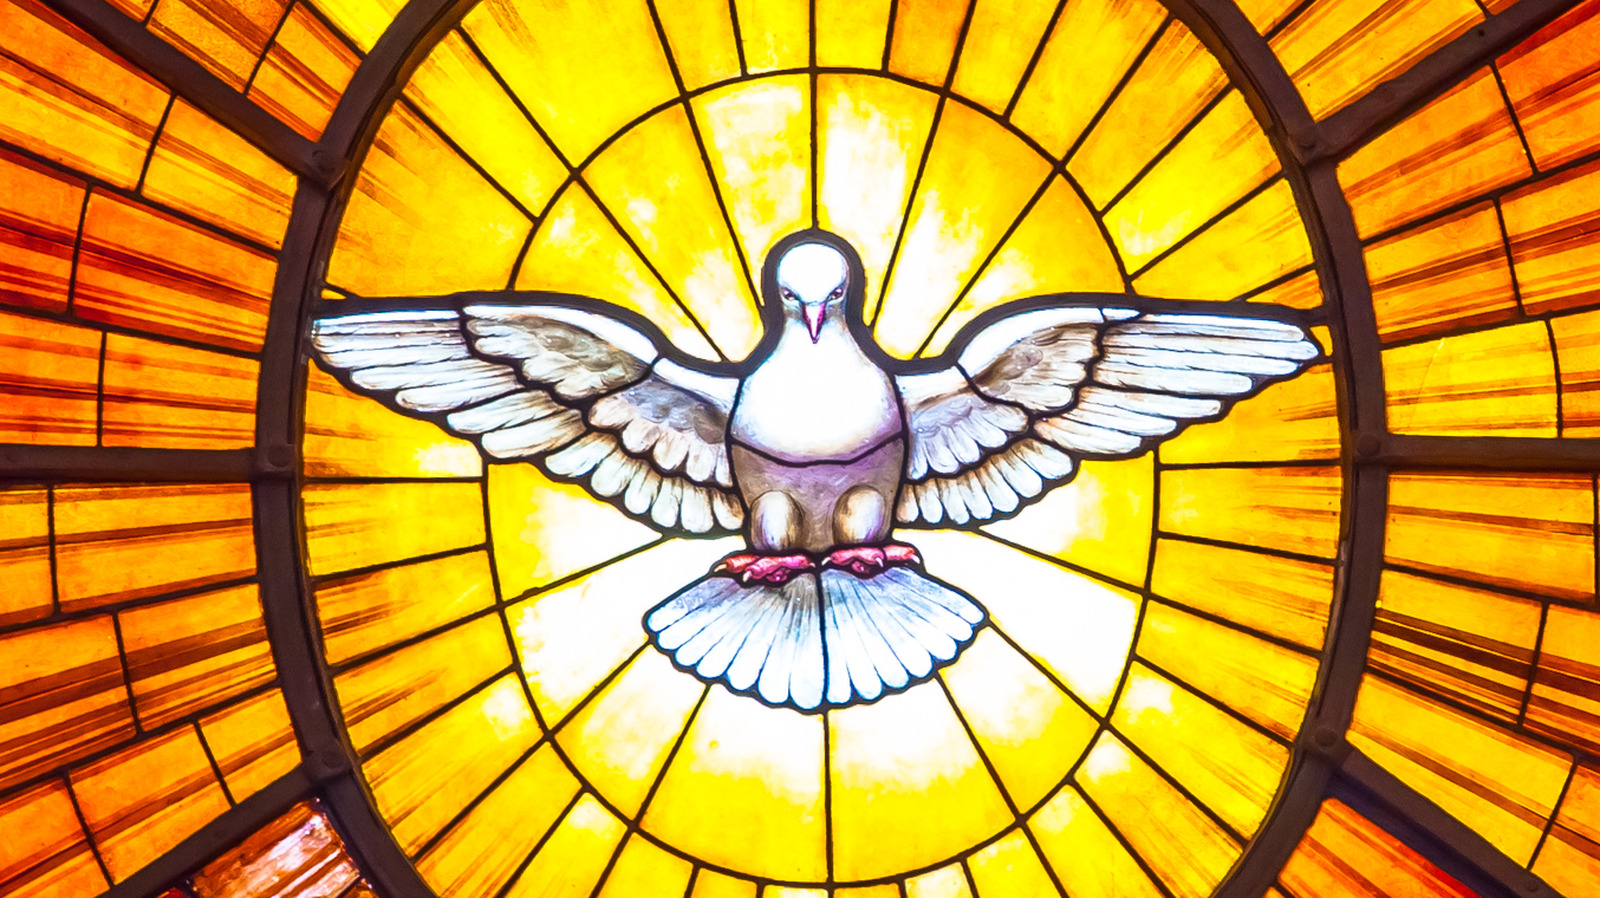 Seven Gifts Of The Holy Spirit And Its Meaning - Tutor Suhu